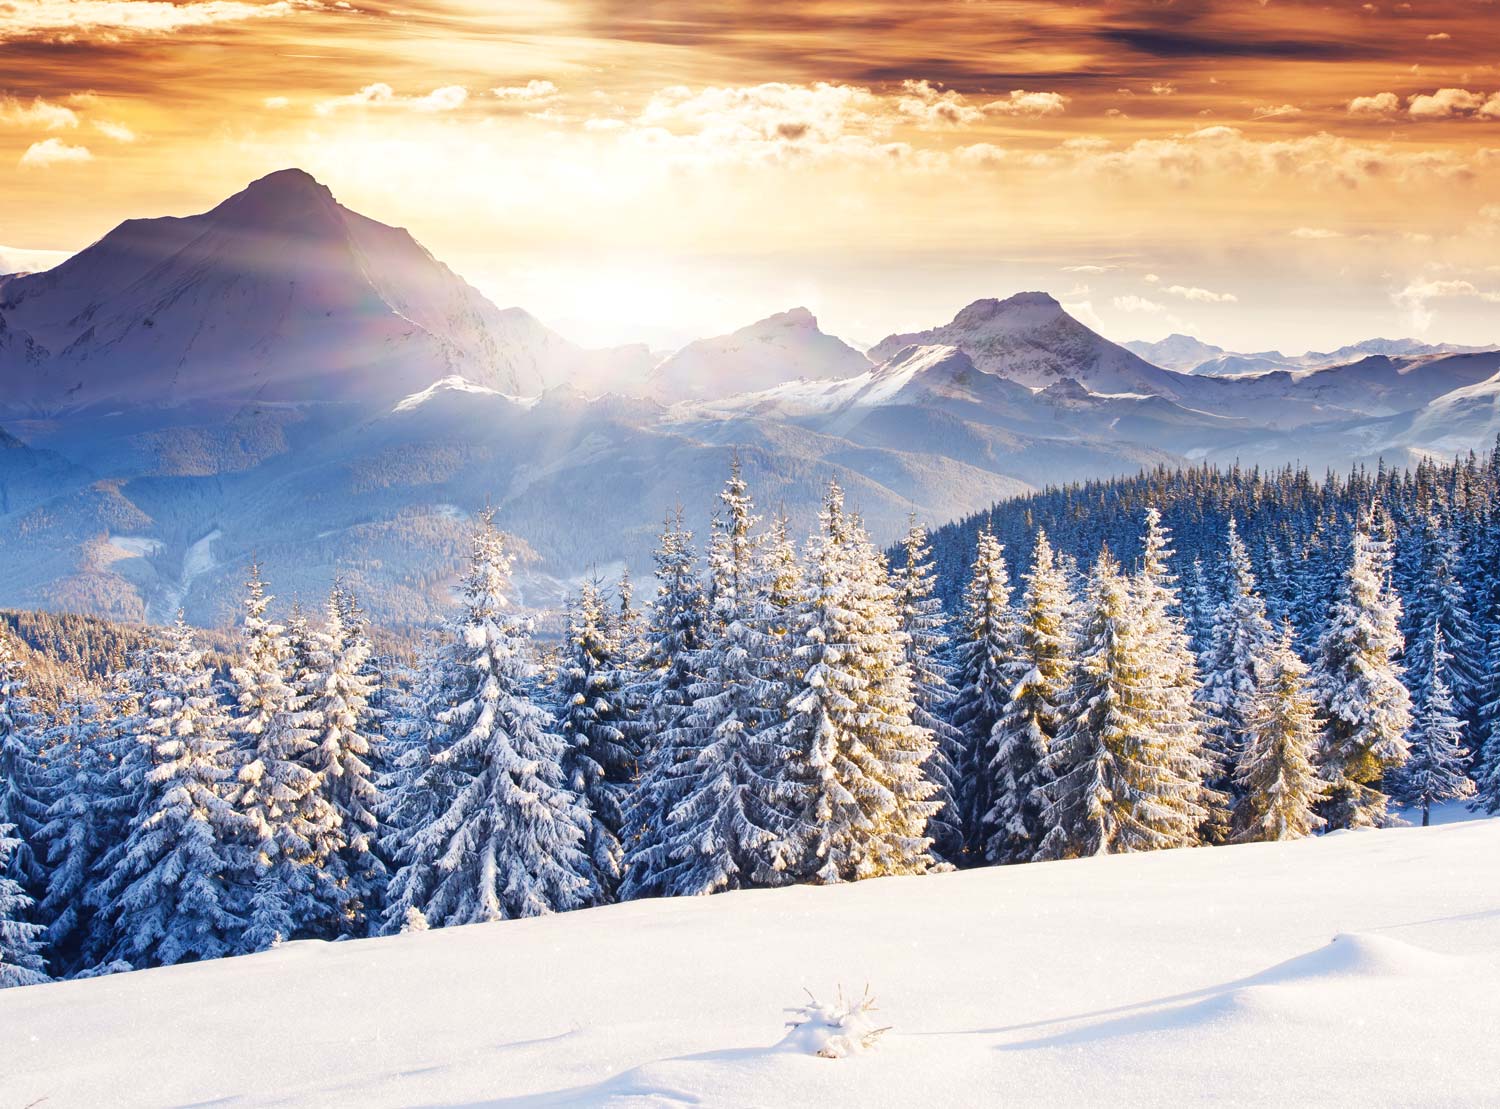 Amazing Evening Scenery in the Winter Landscape Wallpaper Mural